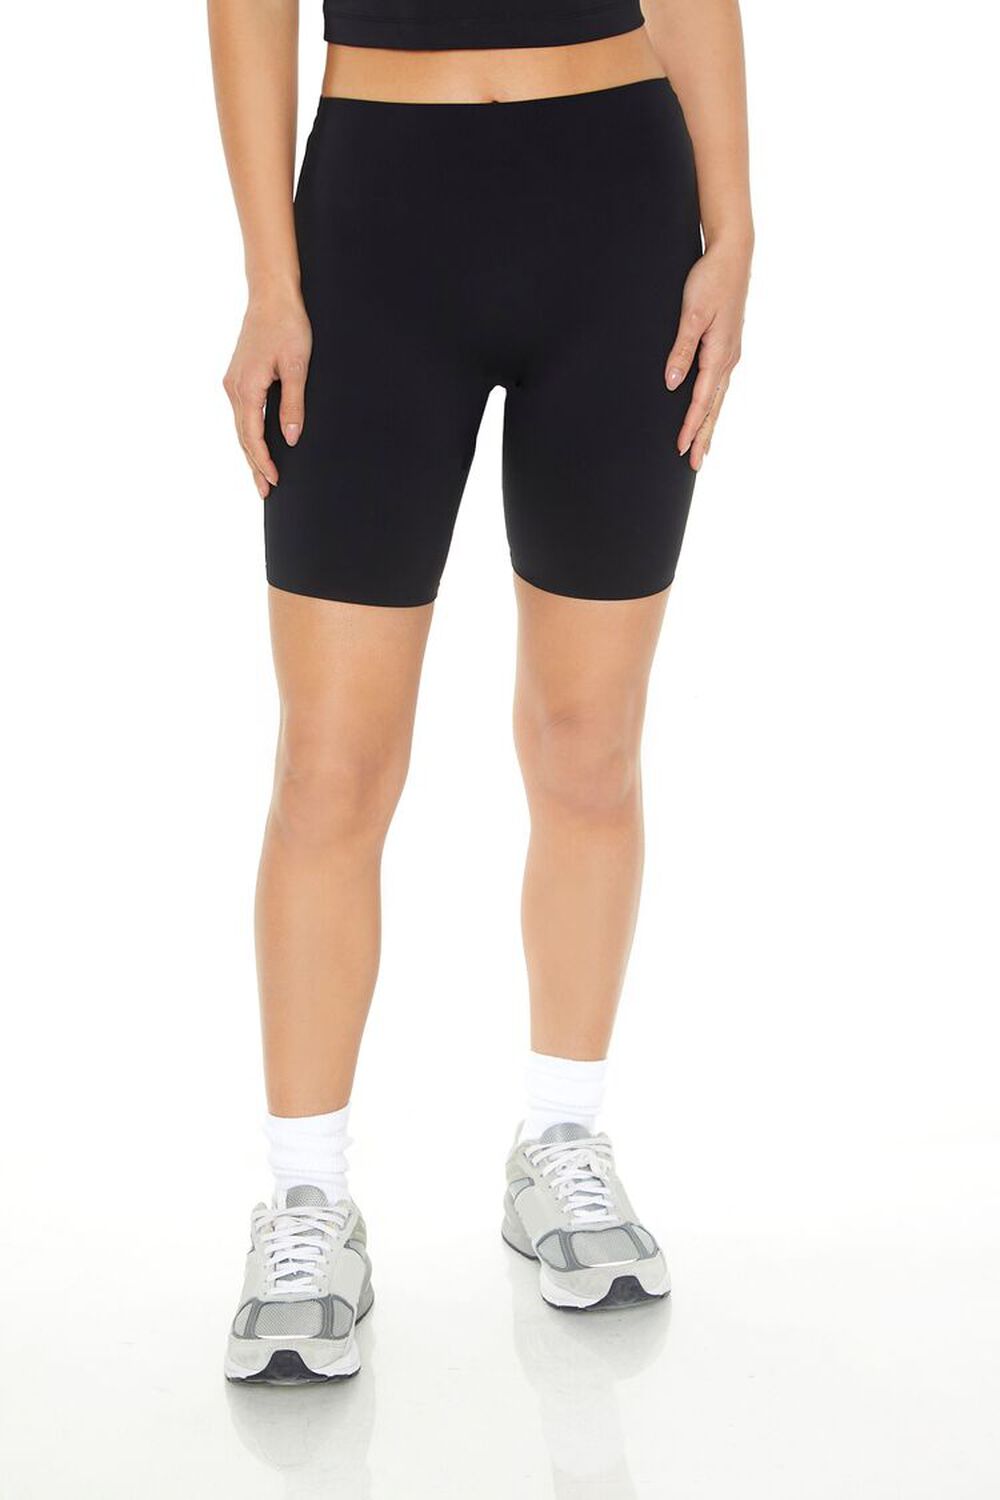 Nike Go Women's Firm-Support High-Waisted 8 Biker Shorts with